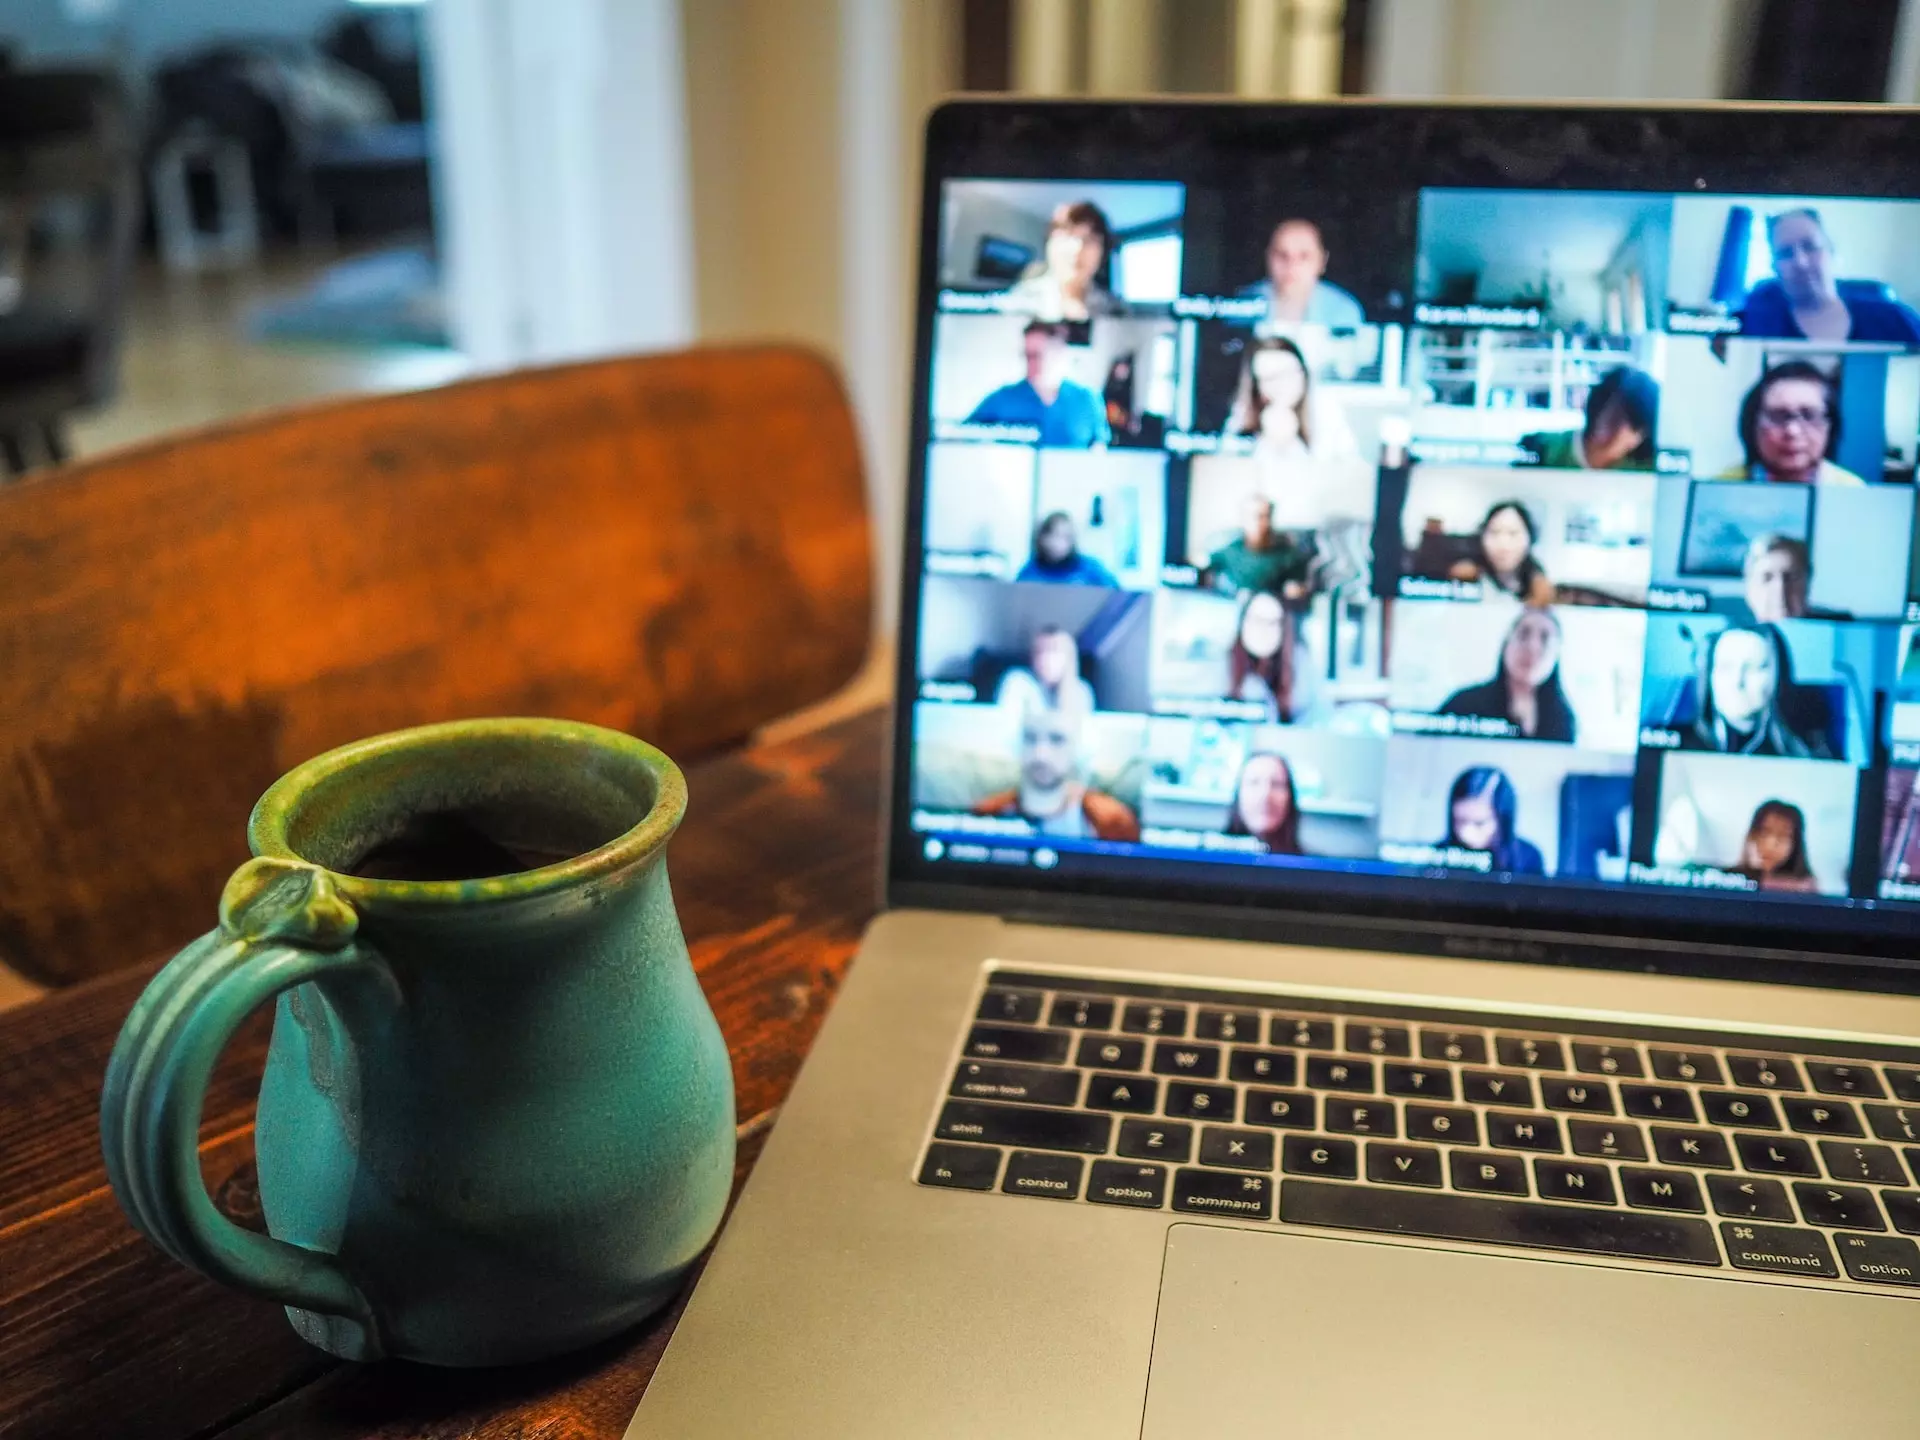 mug next to a laptop with a virtual meeting onscreen and the faces of its participants